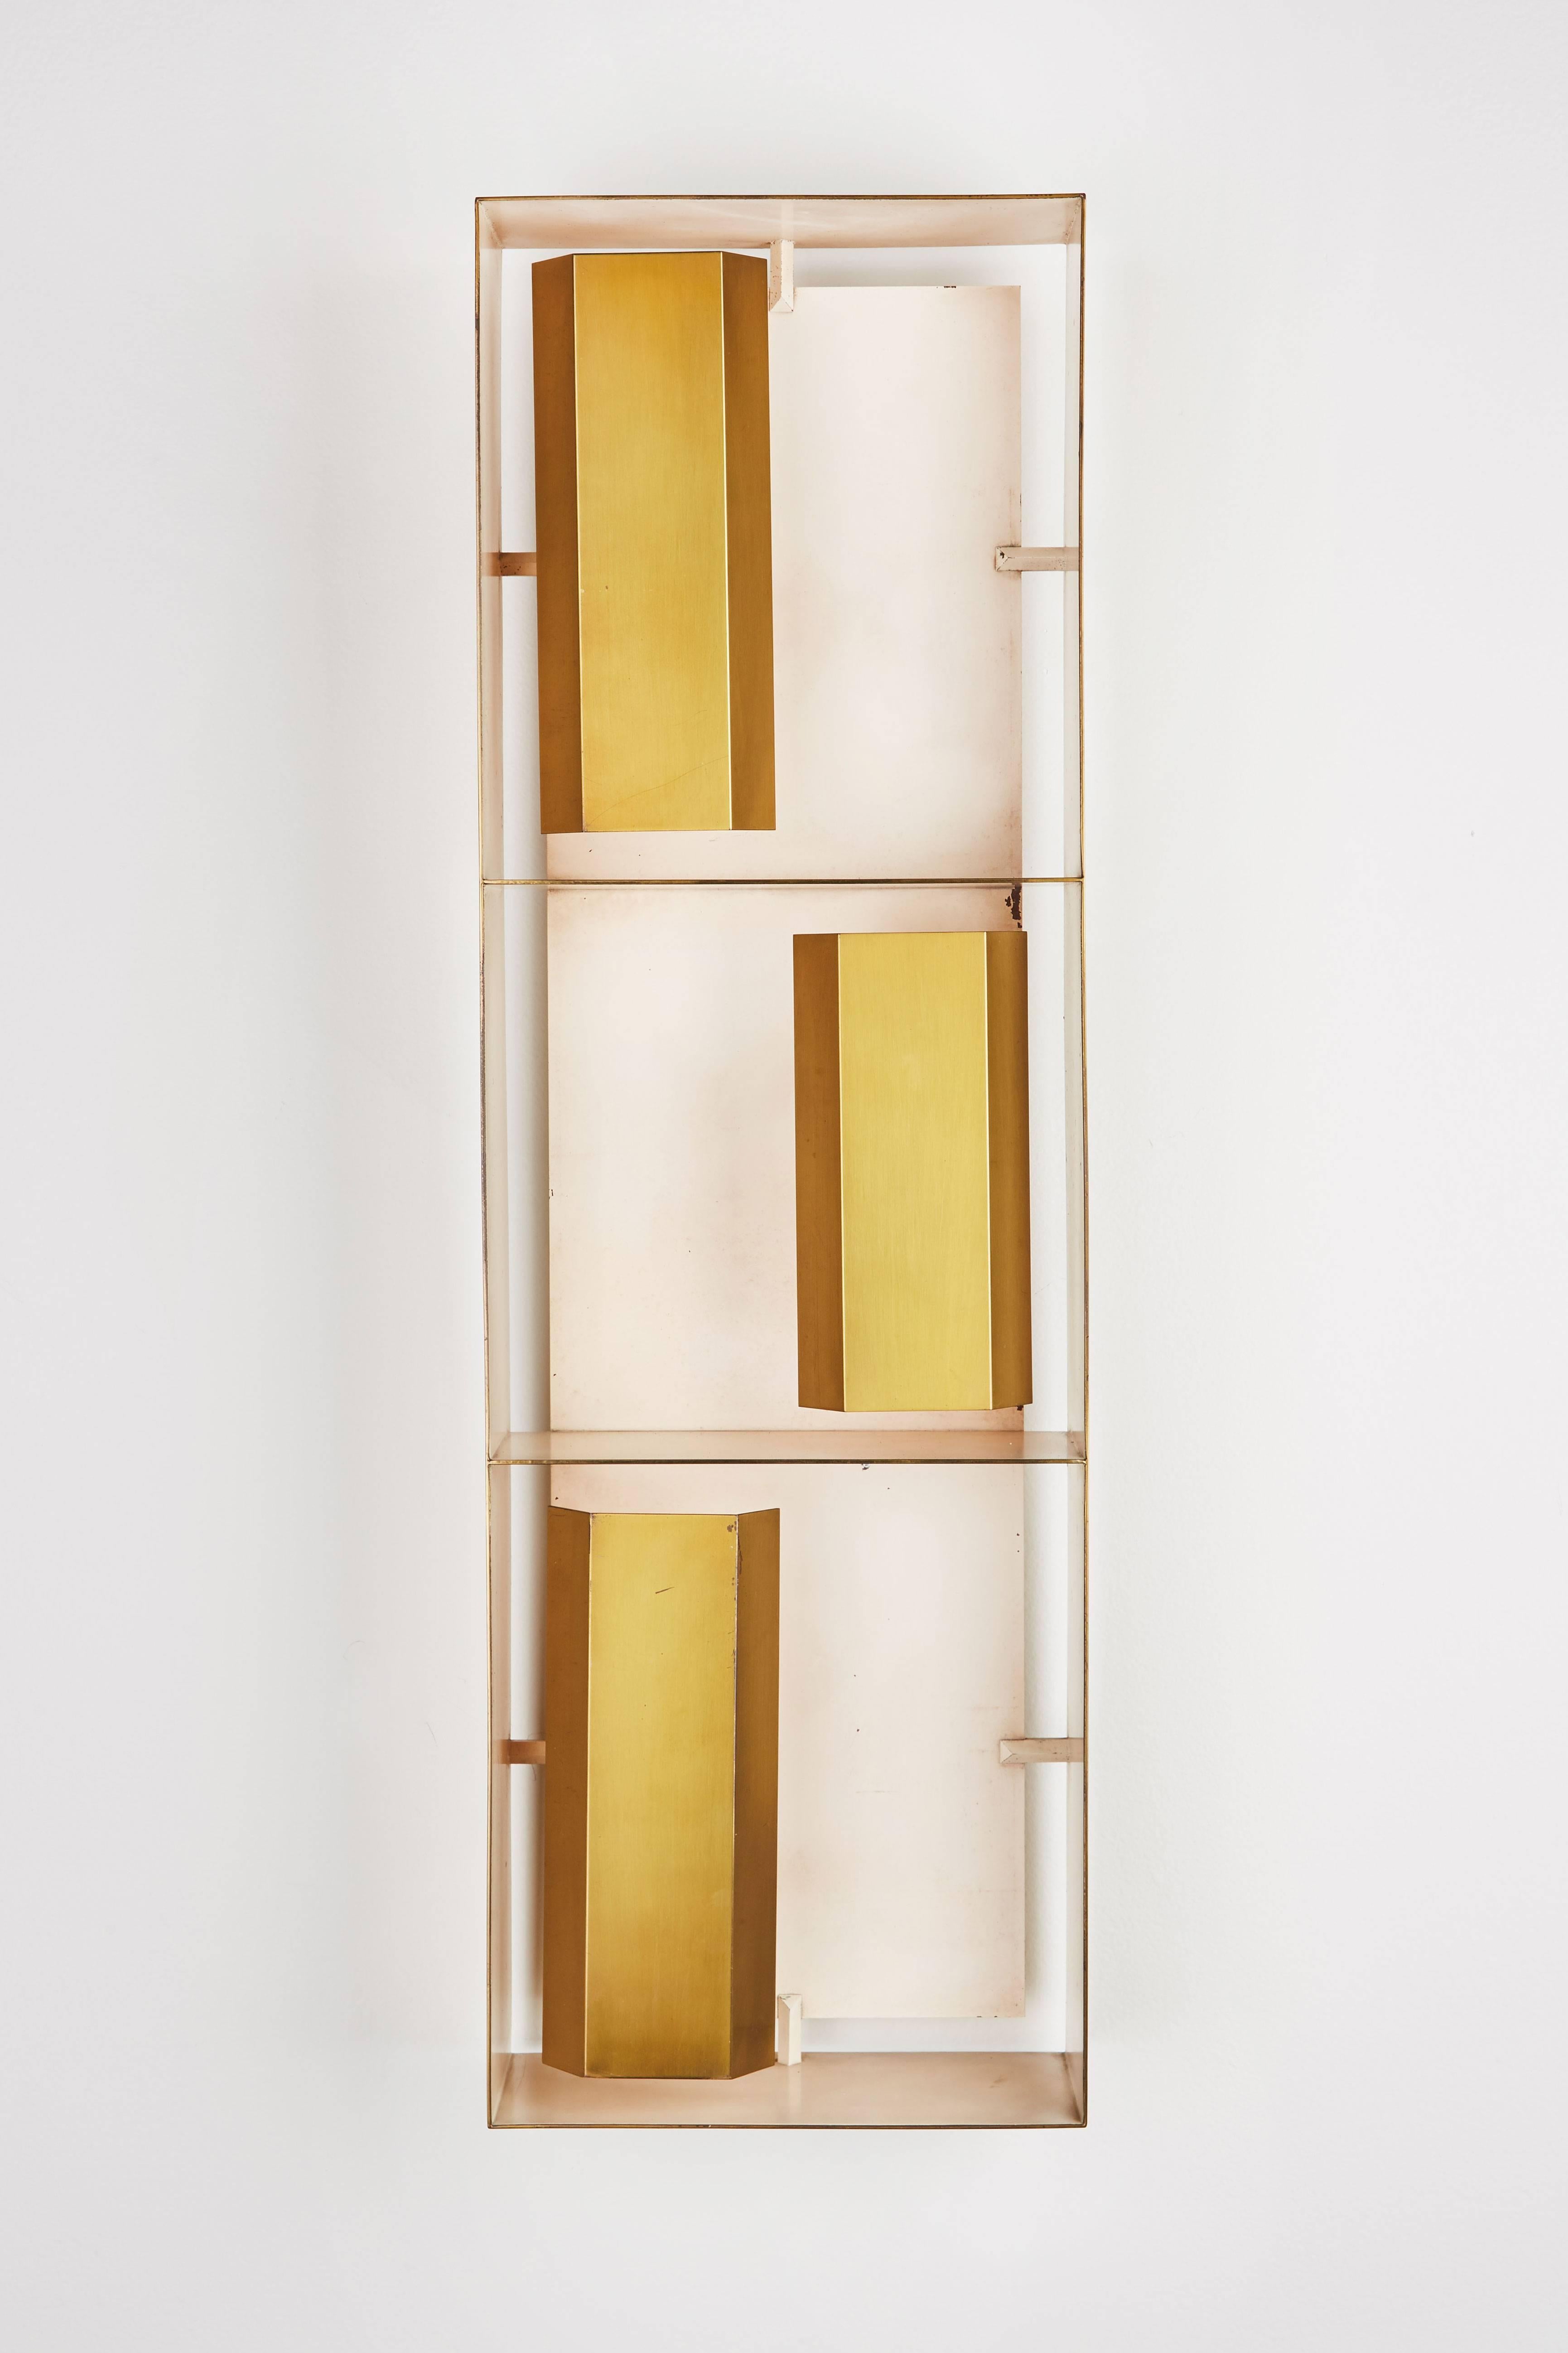 Rare rectangular brass wall light designed by Gio Ponti for Arredoluce in Italy, circa 1960s. Wired for US junction boxes. Takes three E14 European candelabra 60w maximum bulbs.